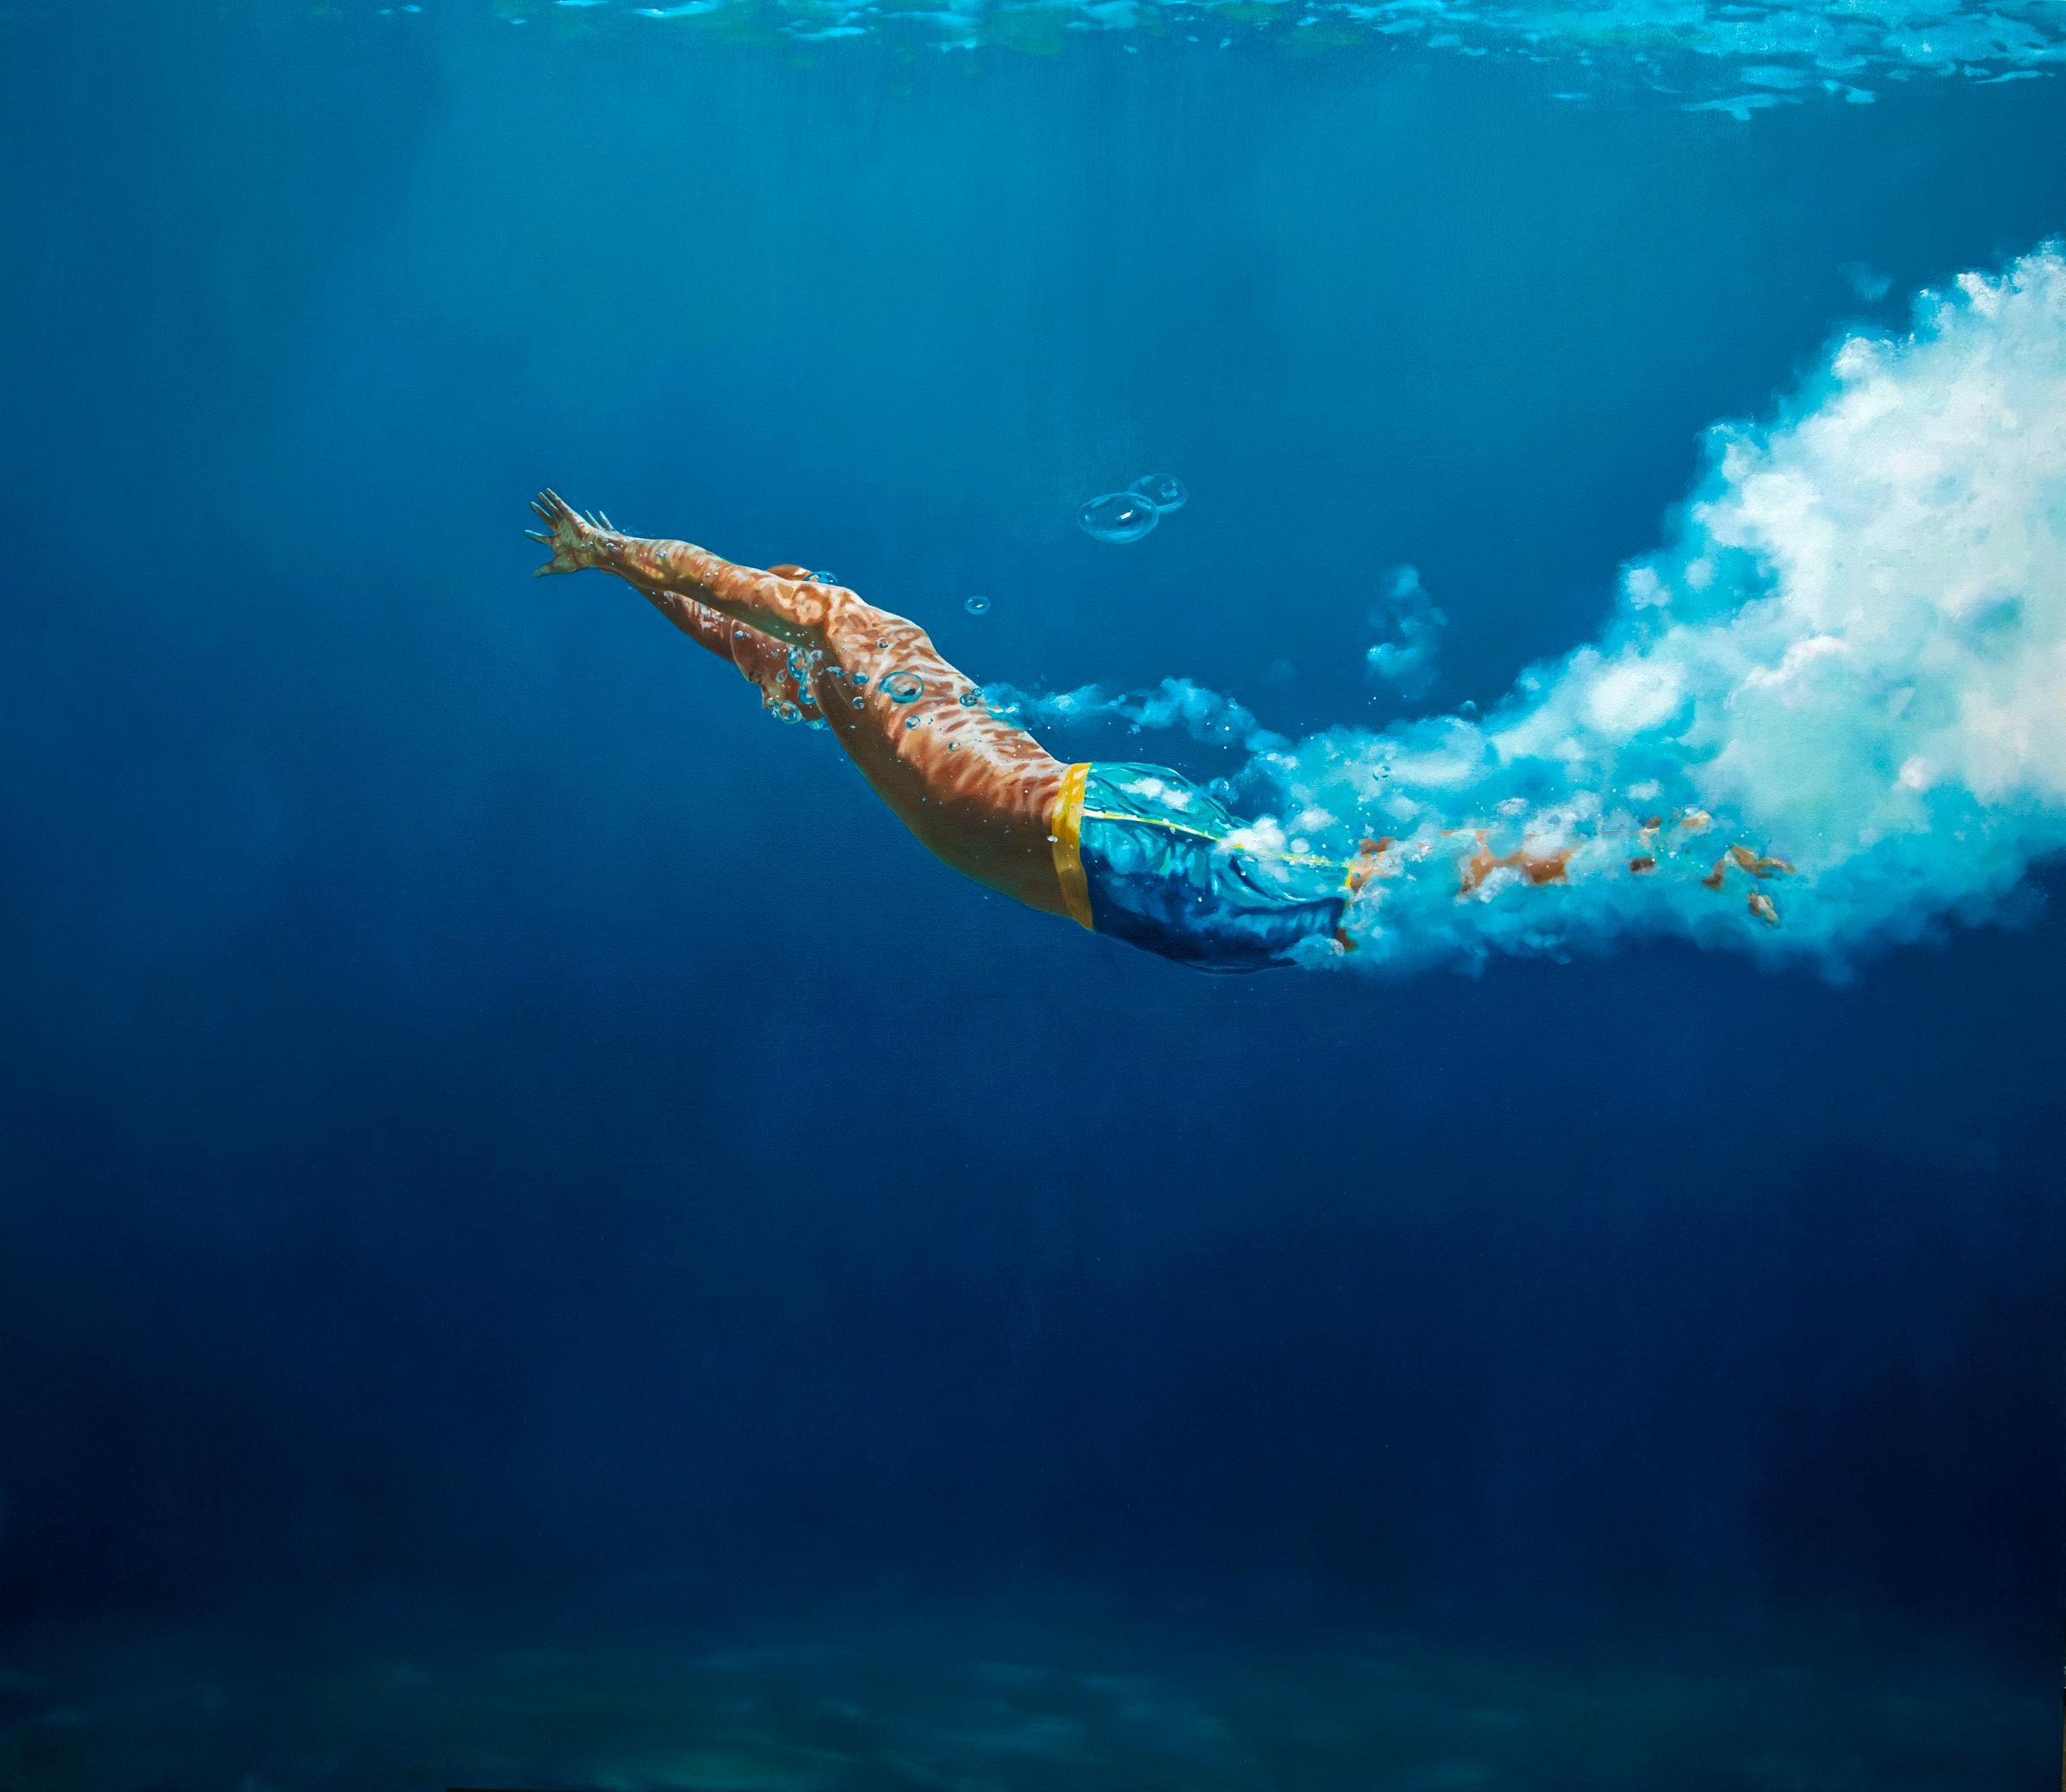 Eric Zener Figurative Painting - SELF - Contemporary Realism / Swimmer / Waterscape / Male Figure